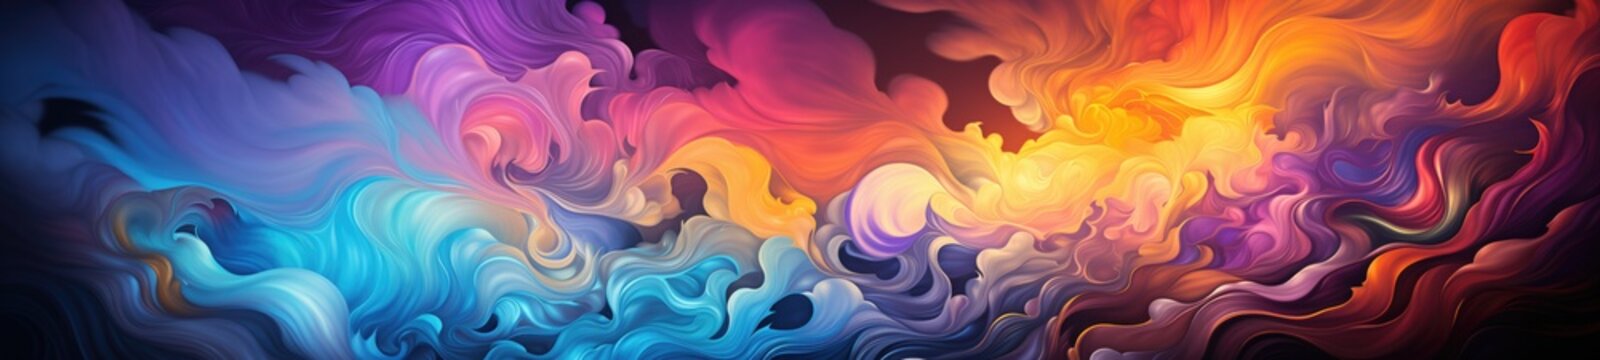 Psychedelic Dreams Style Backgrounds offer a visual symphony of vivid patterns—captivating and dream-like, a celebration of imaginative exploration.